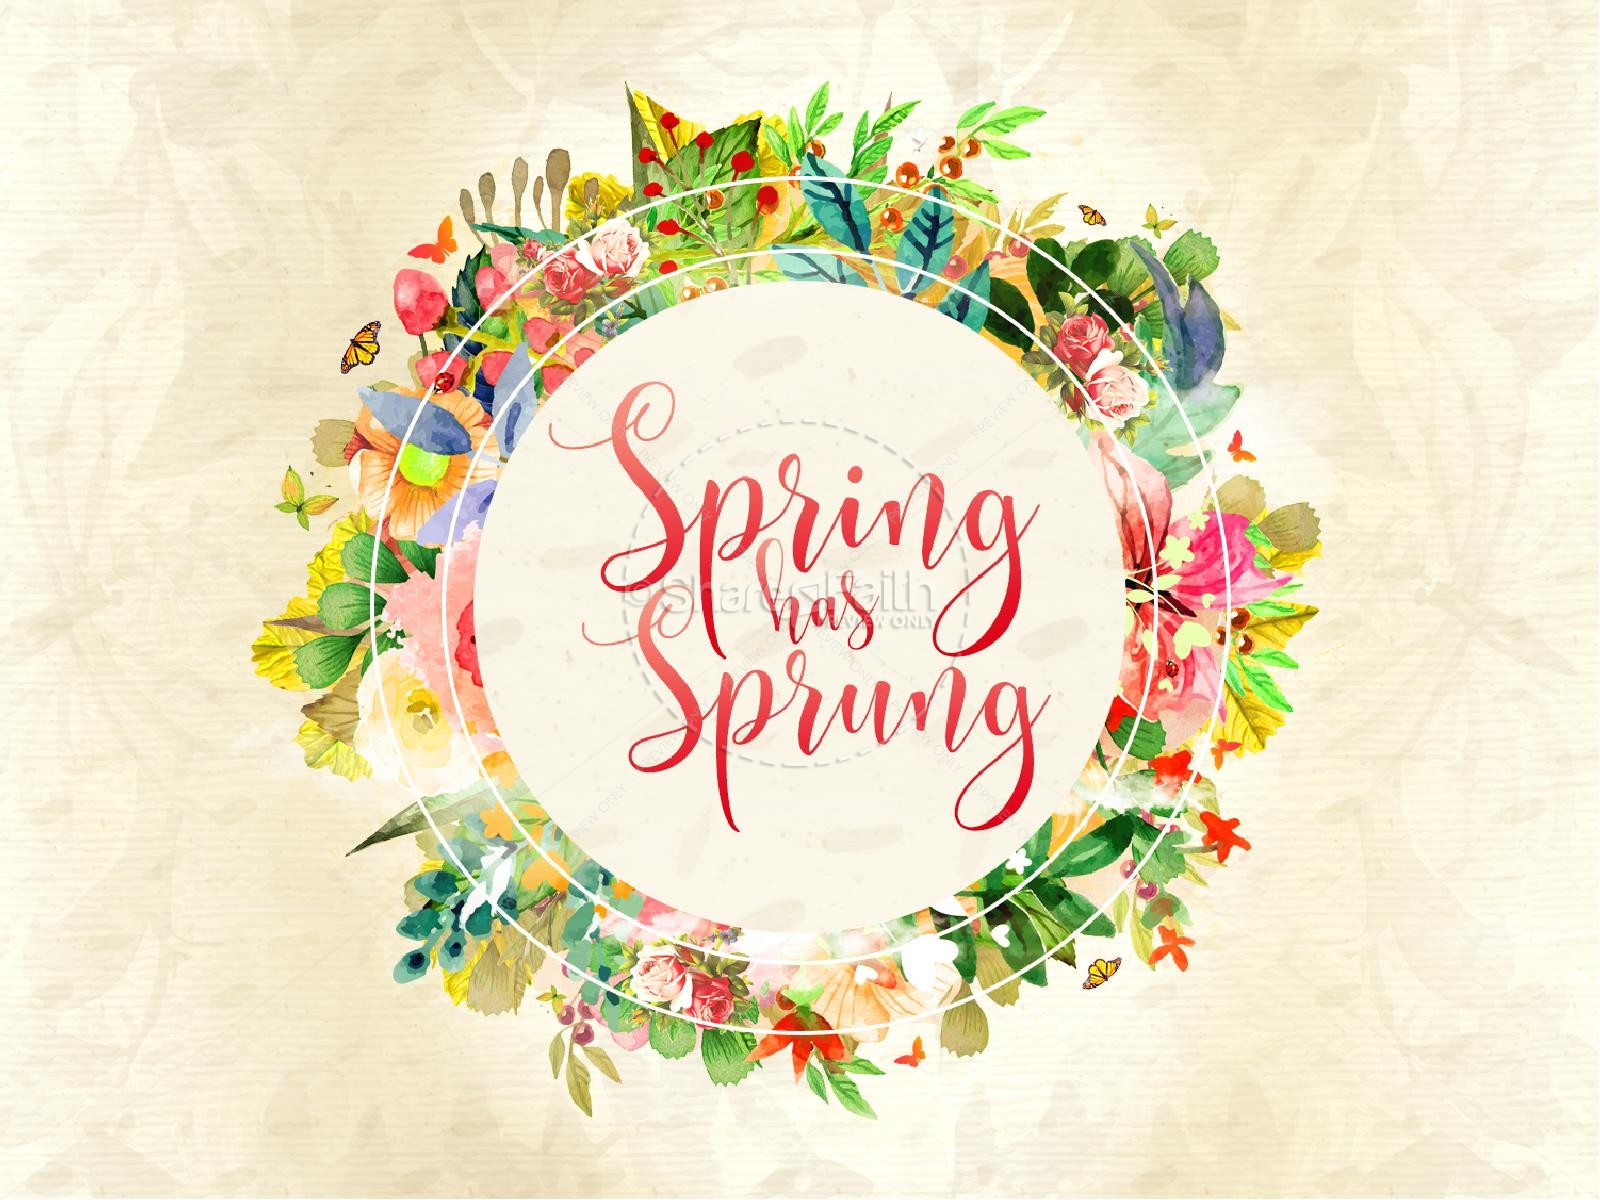 Spring Has Sprung Church Motion Graphic.